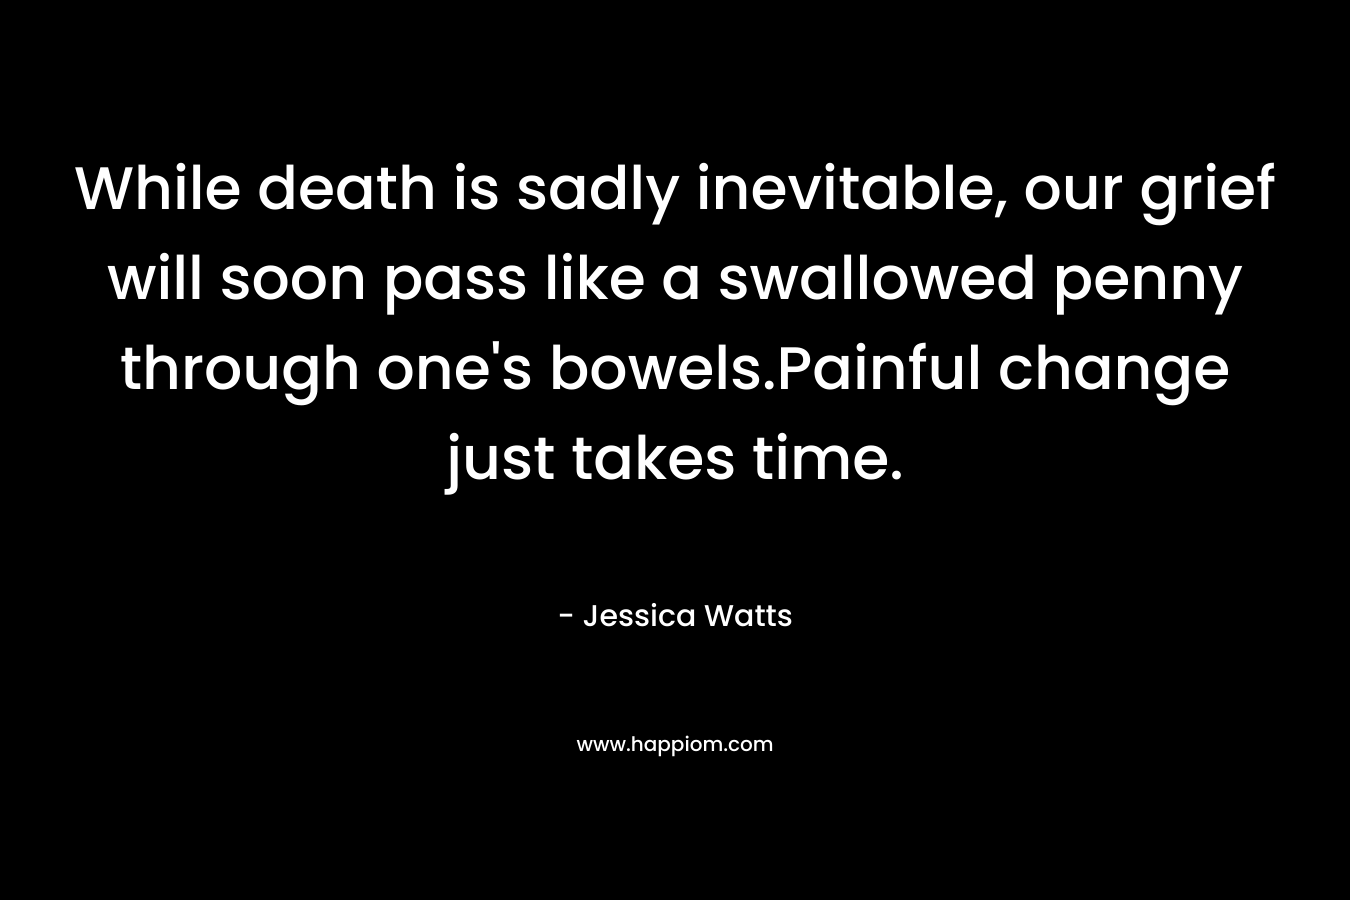 While death is sadly inevitable, our grief will soon pass like a swallowed penny through one's bowels.Painful change just takes time.